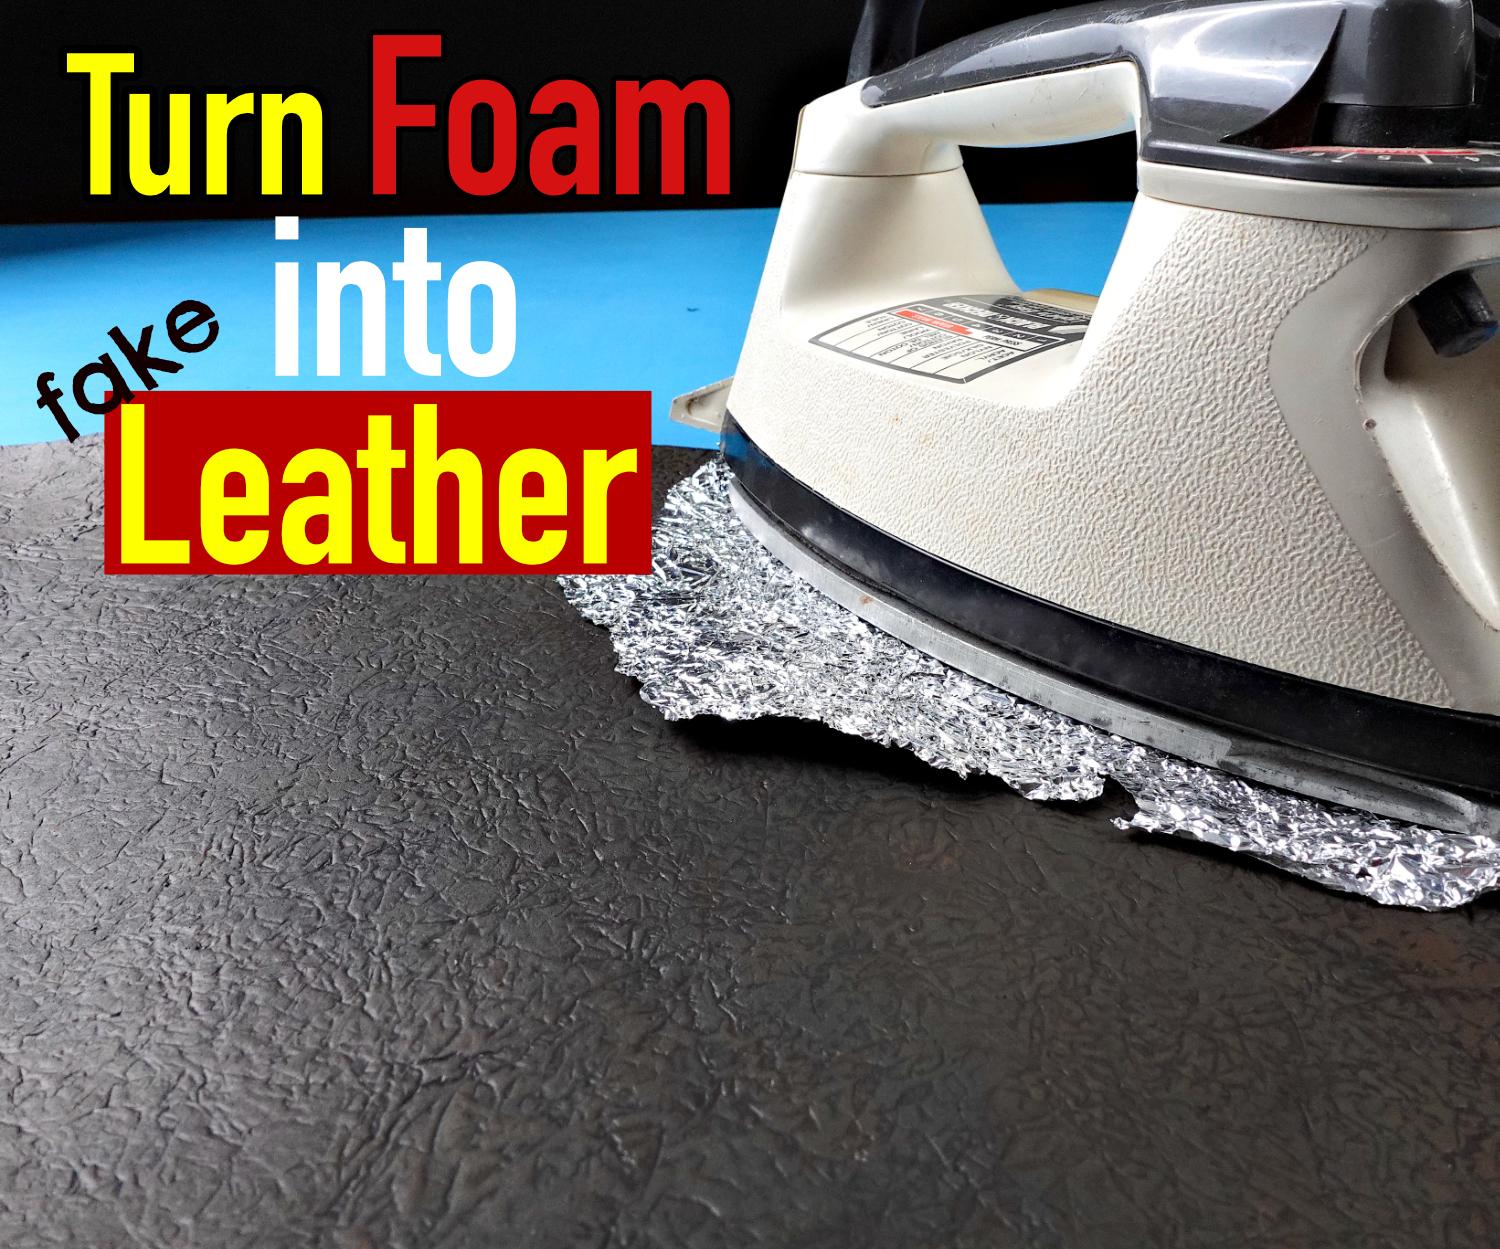 Faux leather instructables.jpg